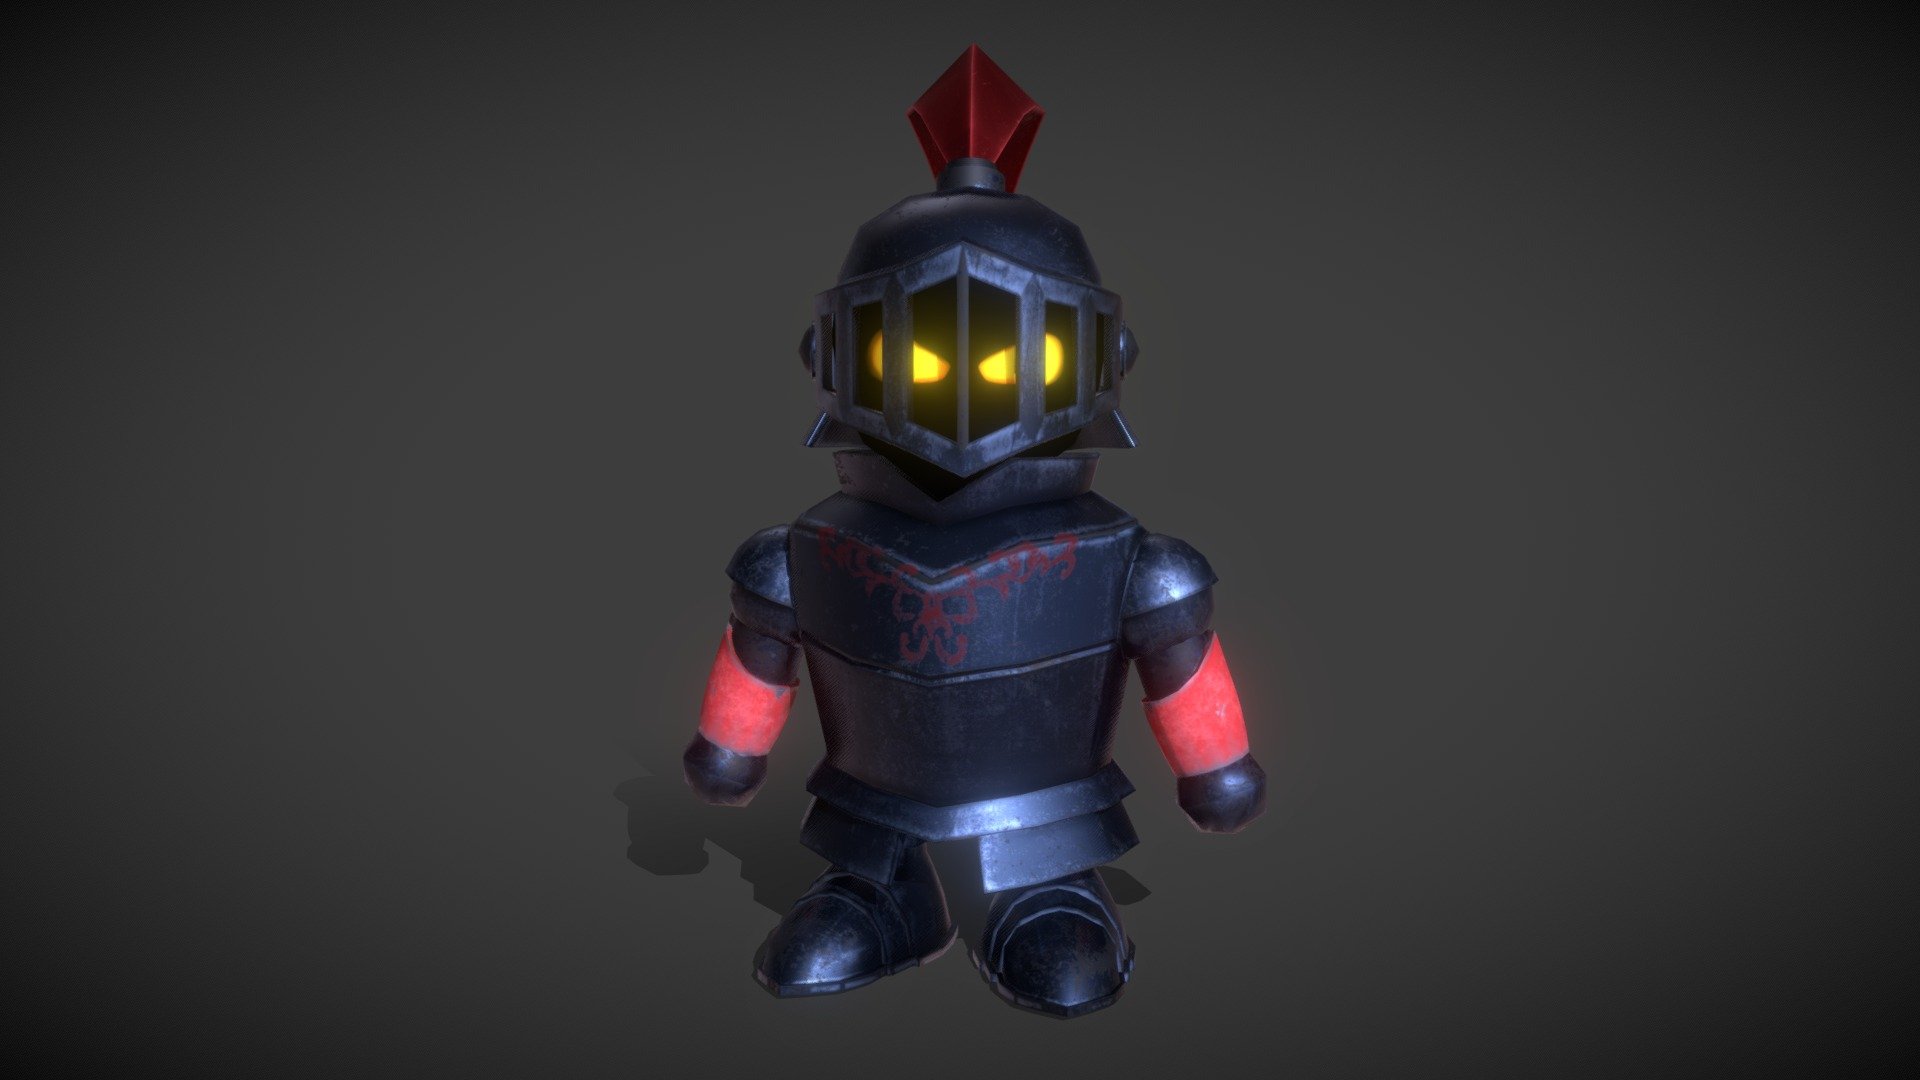 A Game character for a school project.
Model and textures Made By ME.
Riggin Made by https://sketchfab.com/adavid.fcb
Purchase includes, model, textures maya document with the rig 3d model